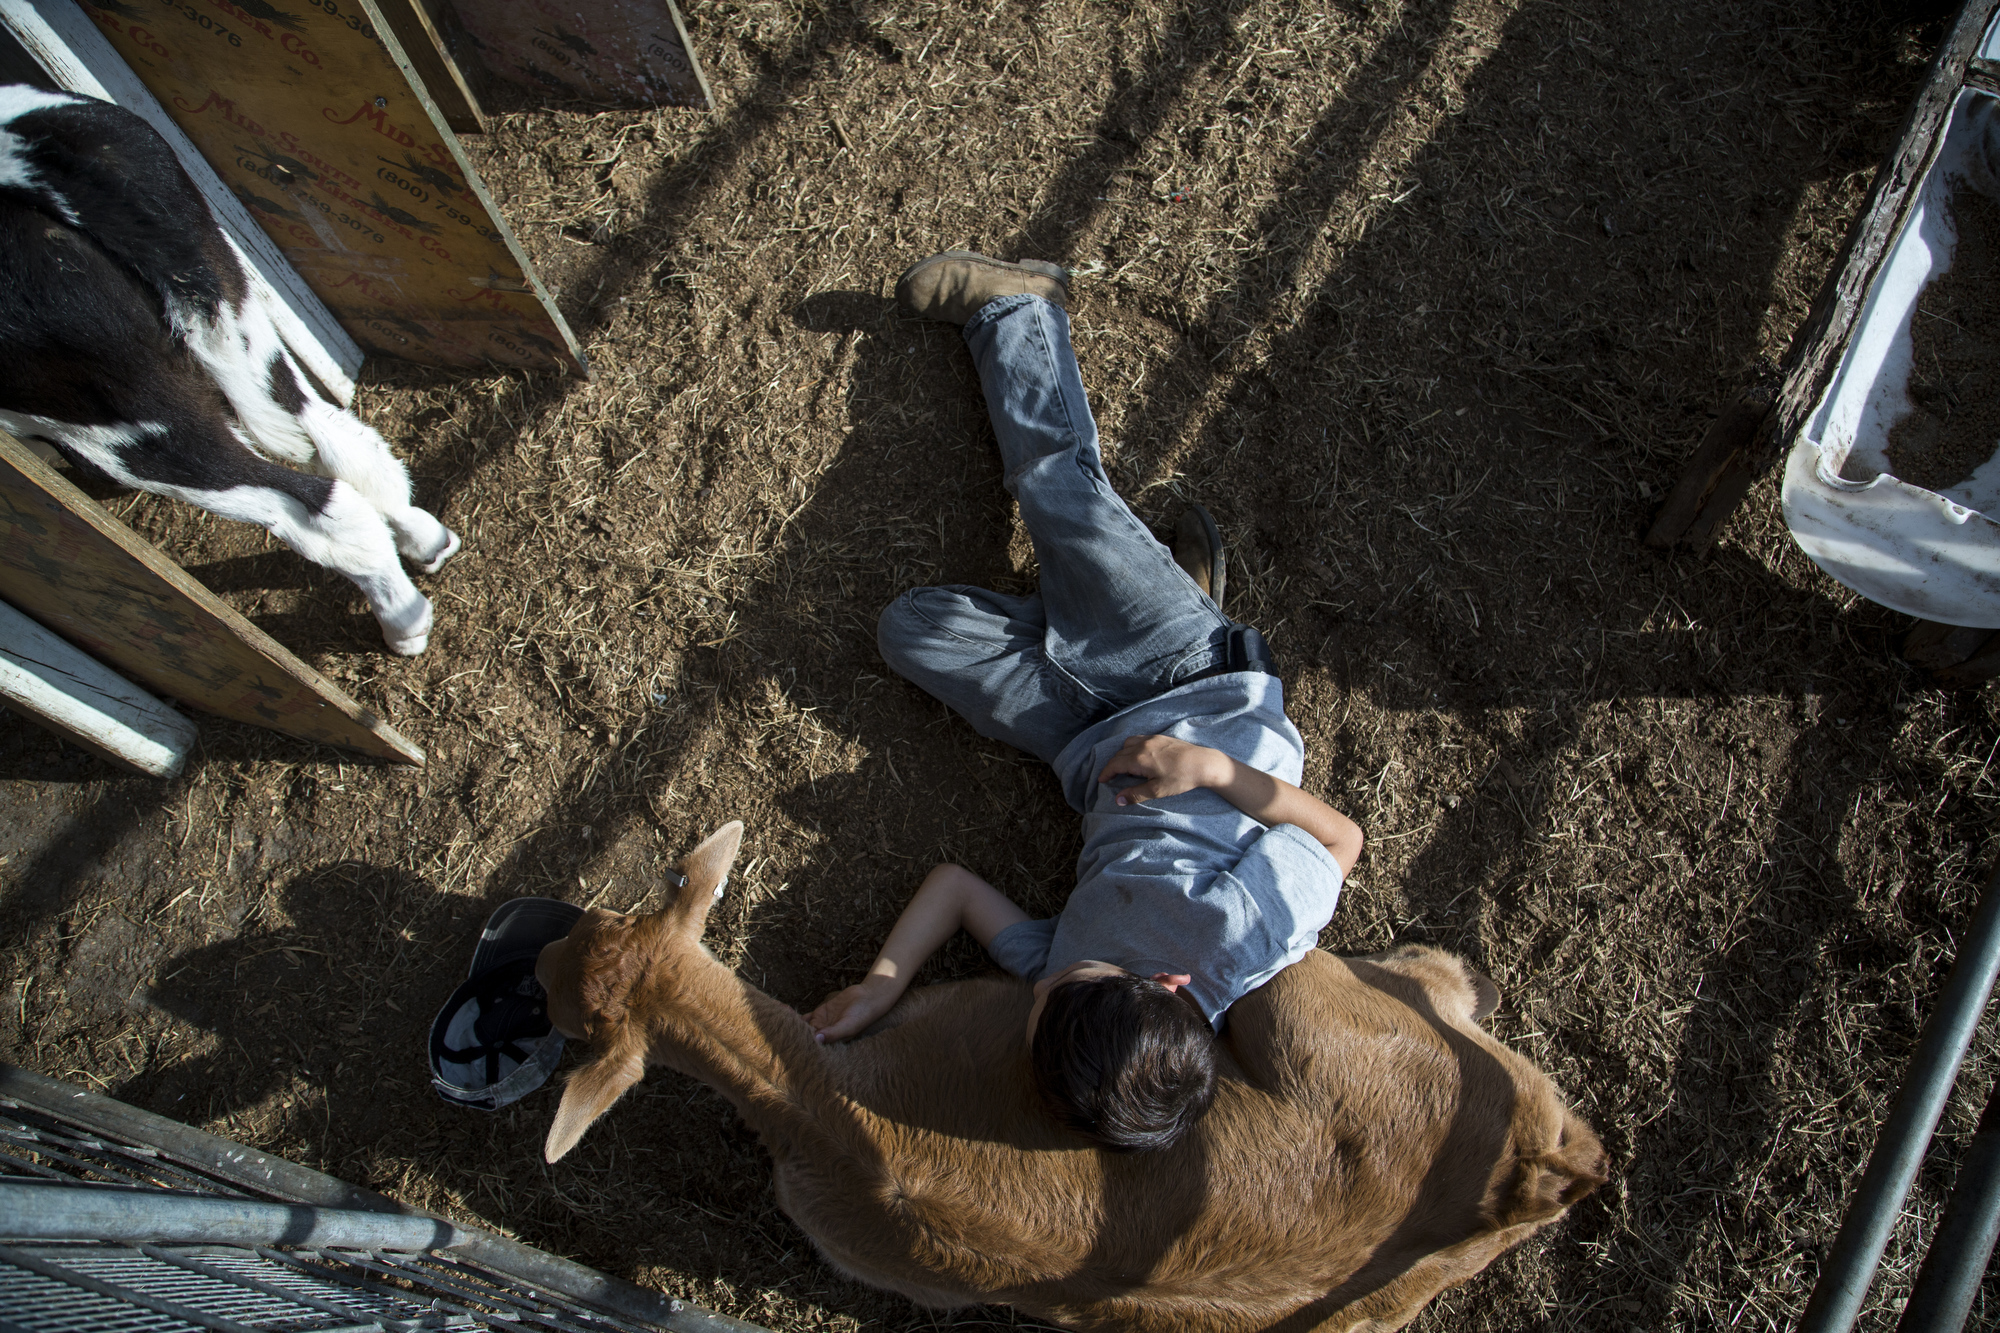  Alex Busciglio, 9, lays in the calf pin at Tower Dairy, in Tampa, Florida, on March 24, 2017. Alex and his brother Dominic, 5, love spending time on the farm, calling the cows "Moo-Moo's," and riding in the Bobcat with their dad, Jeff. 